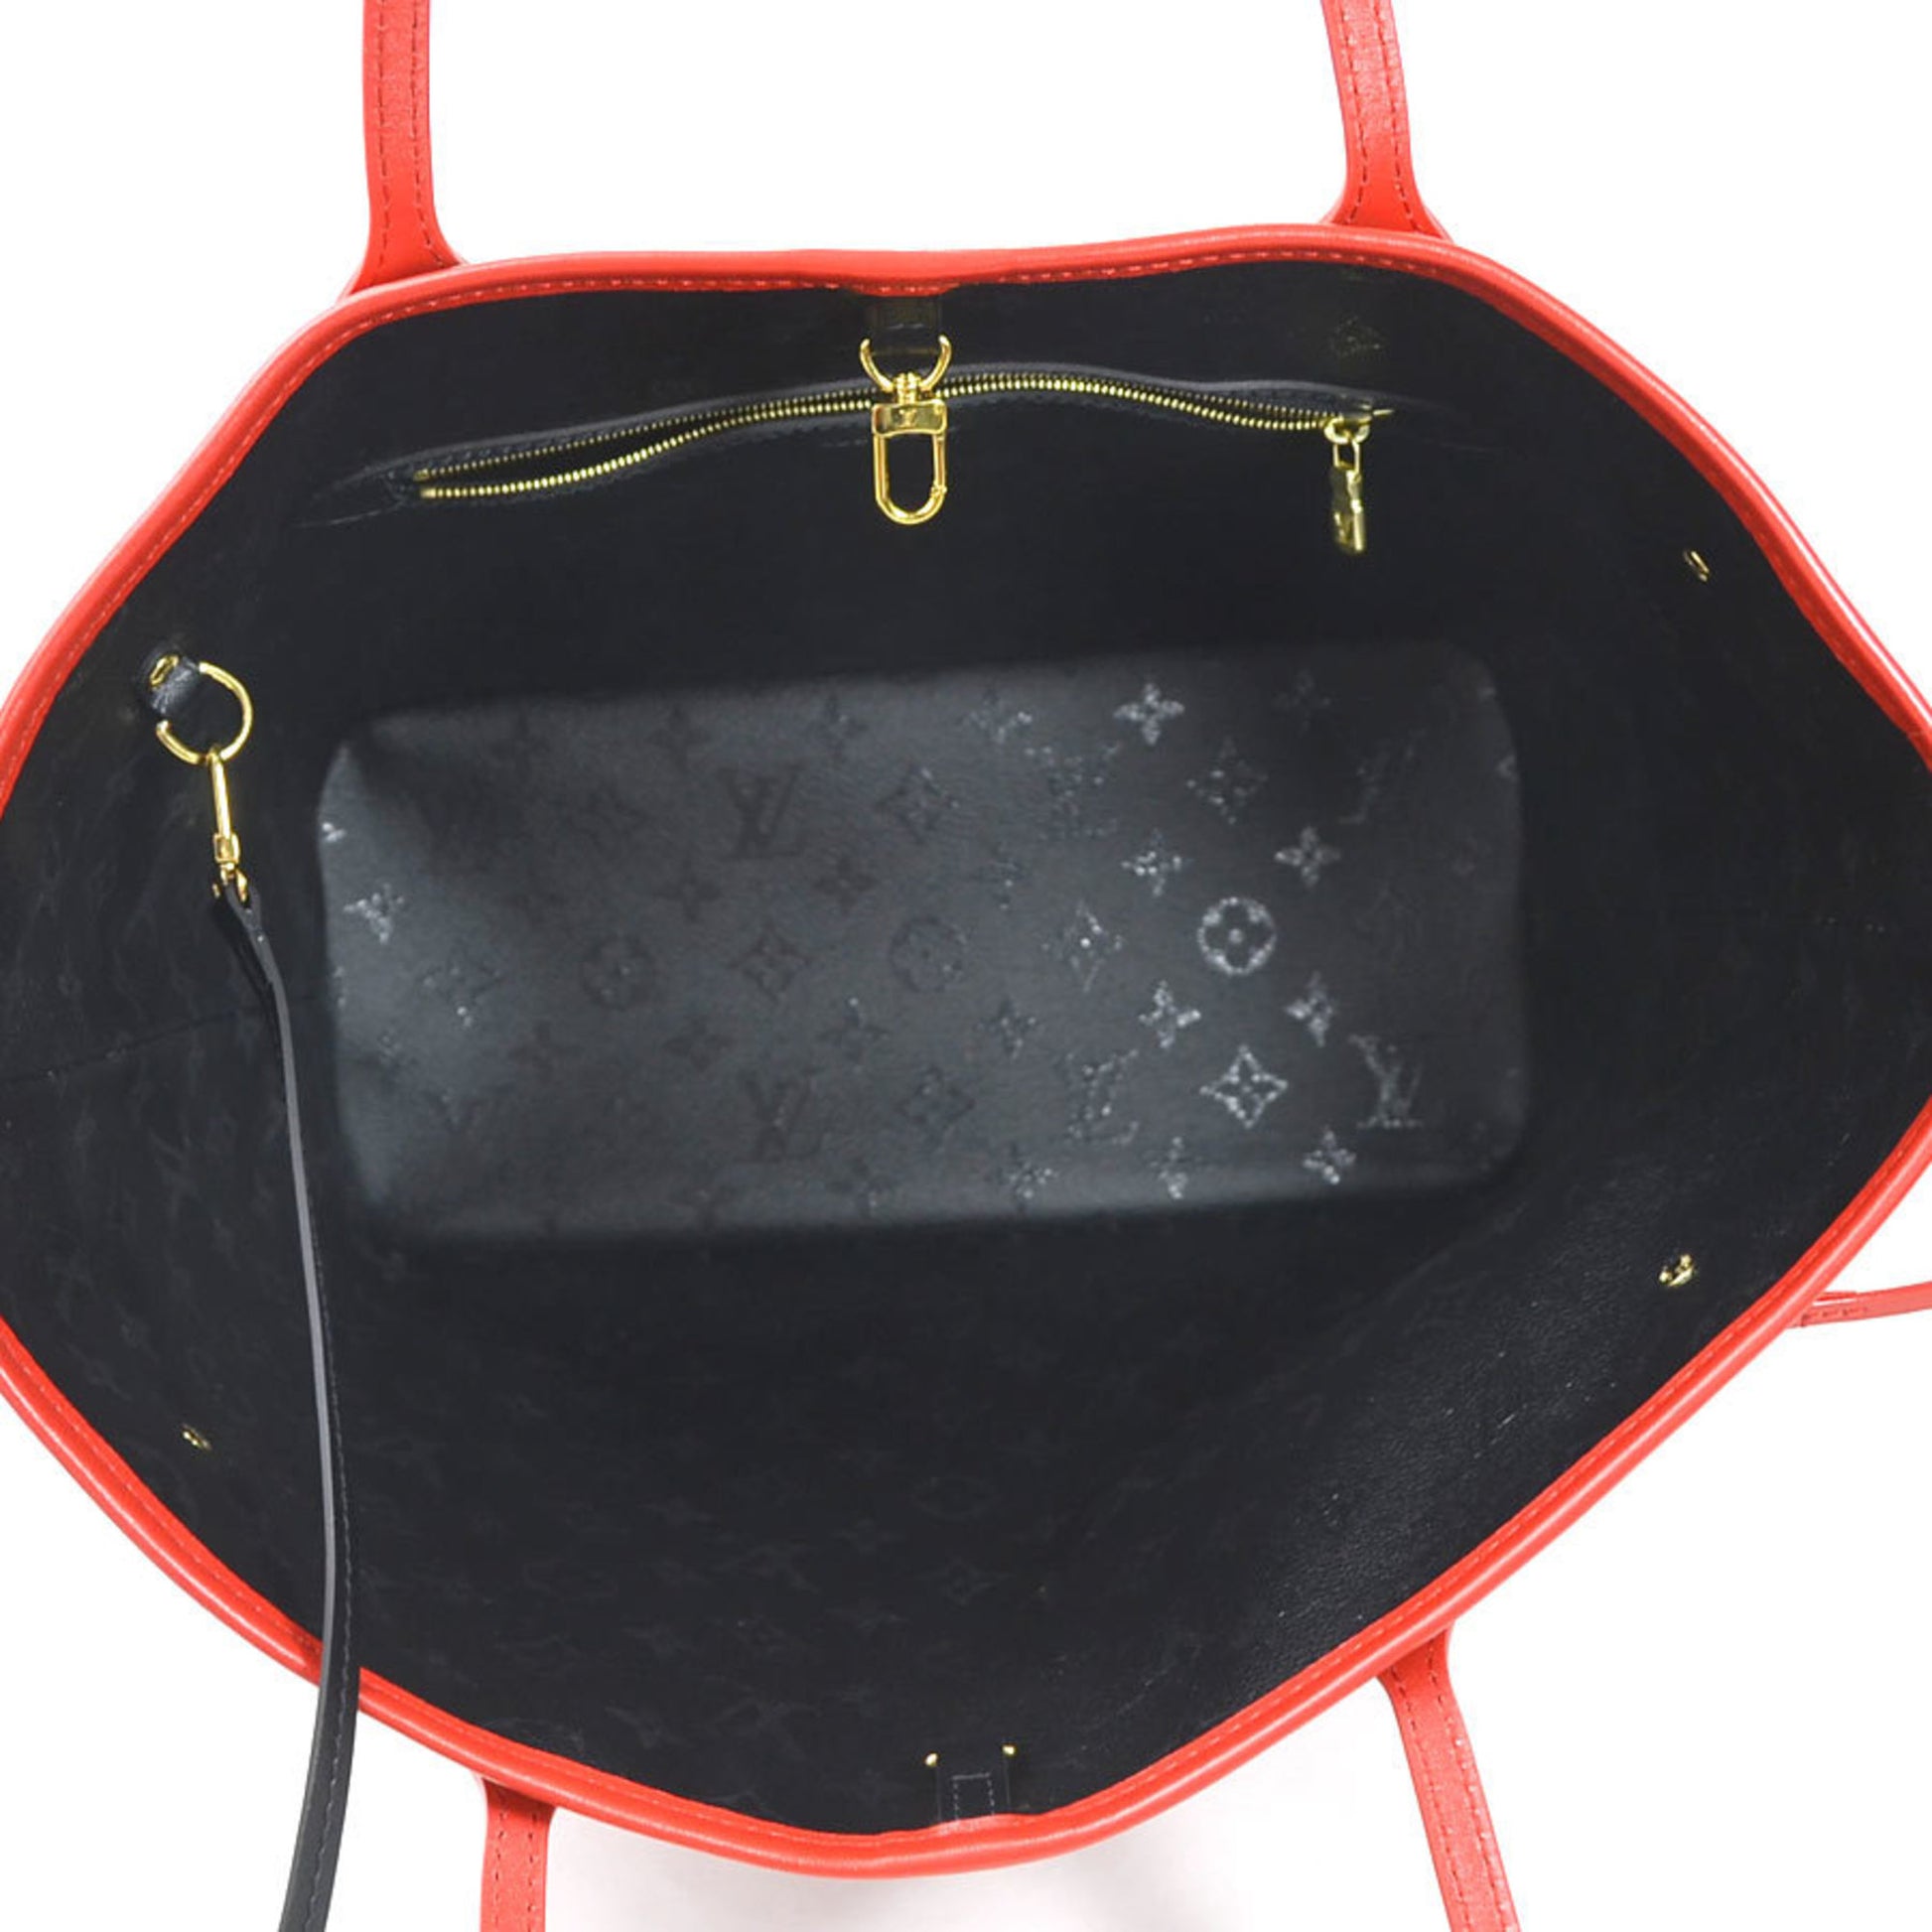 Shop Louis Vuitton NEVERFULL LVxUF Neverfull MM (M45544) by SkyNS